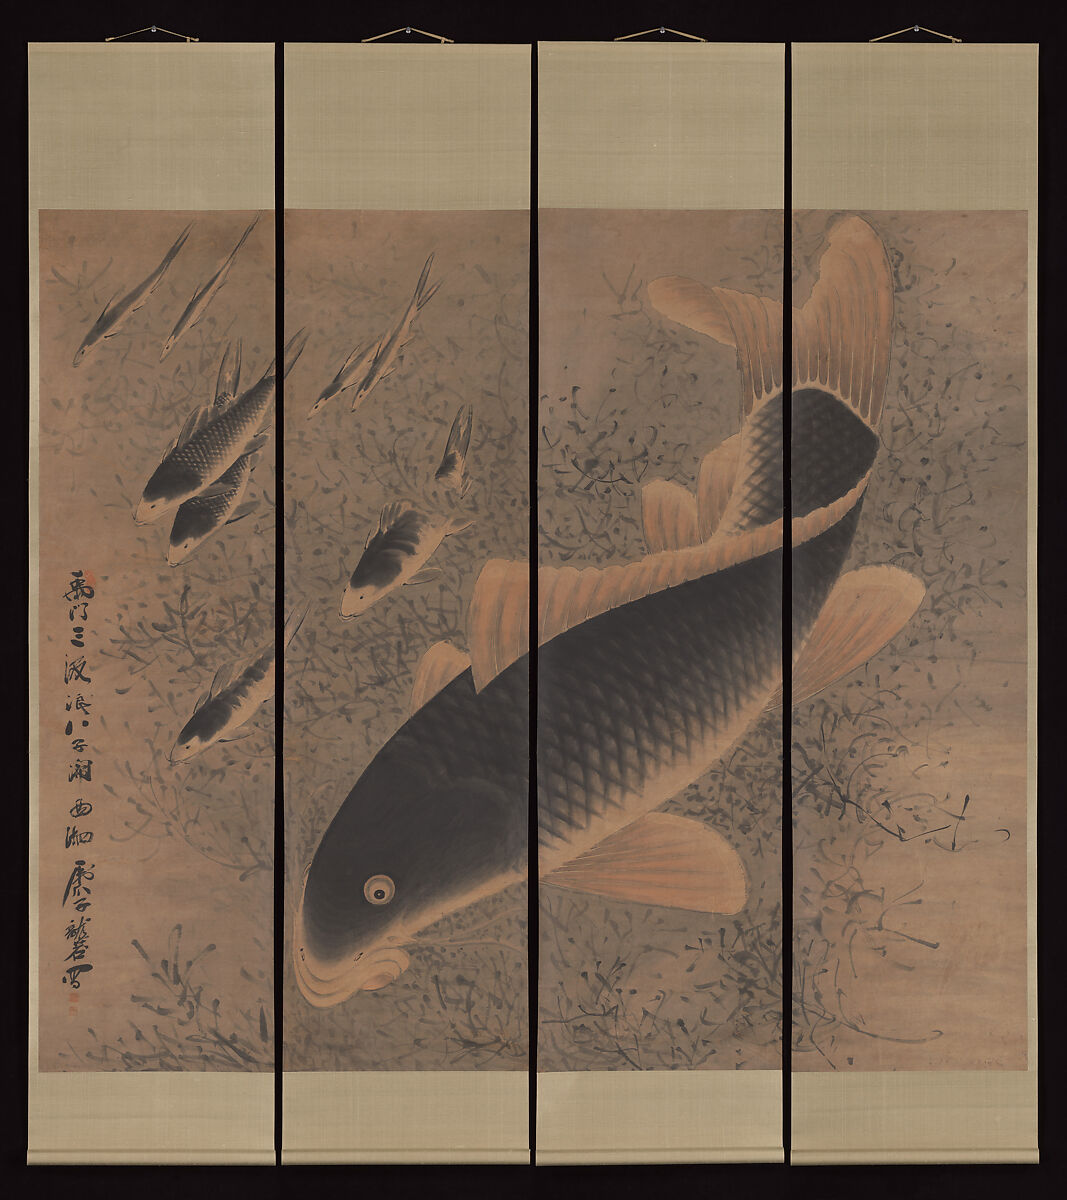 Nine carp, Gong Gu, Set of four hanging scrolls, ink and color on paper, China